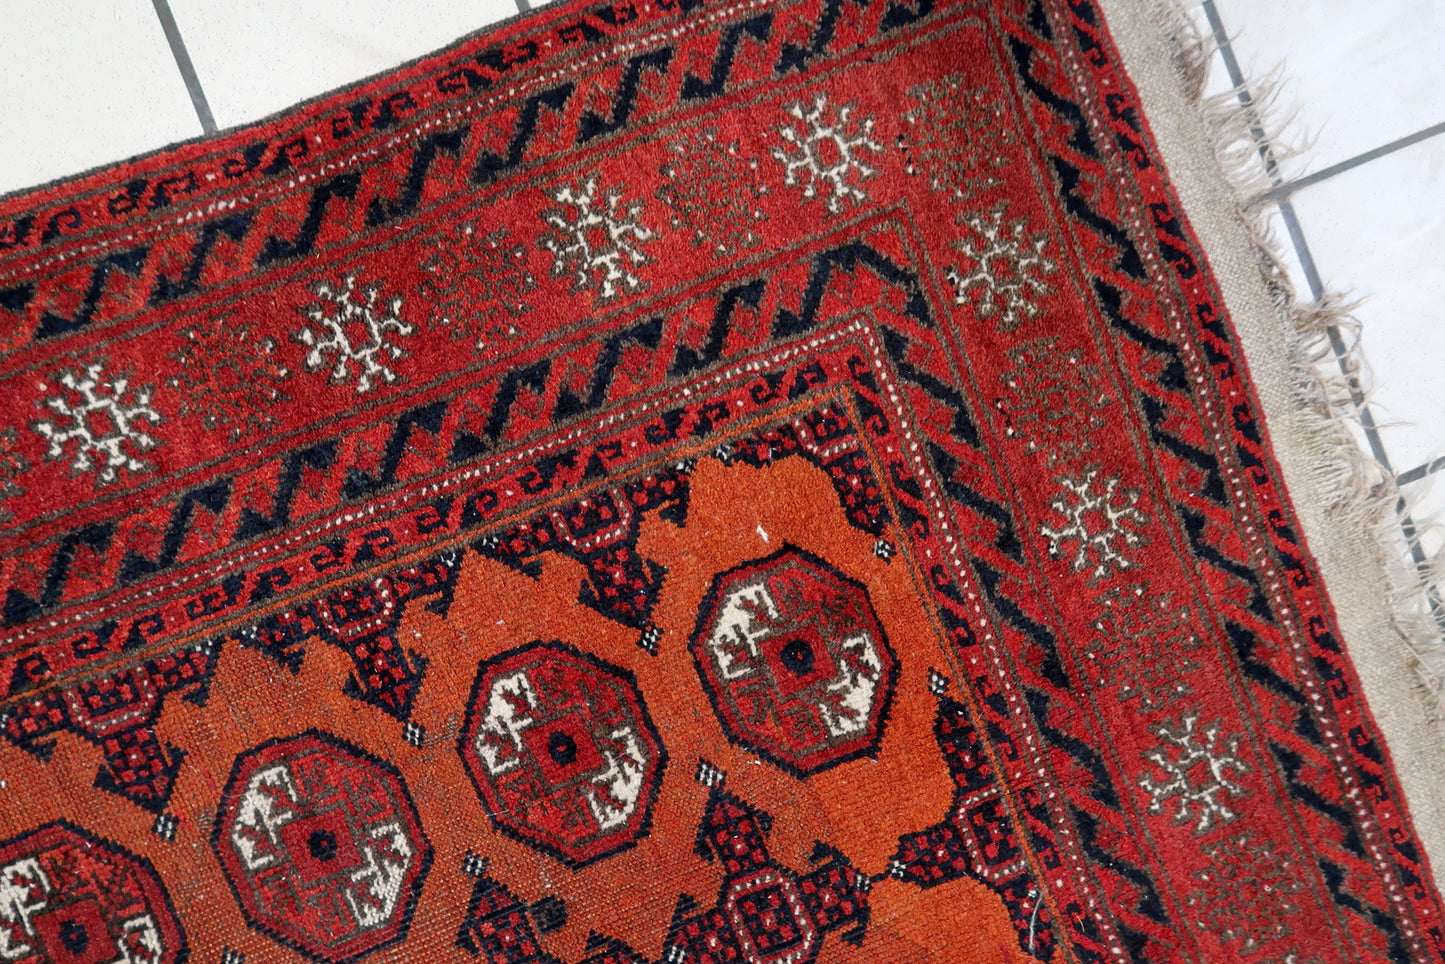 Close-up of compact size on Handmade Antique Afghan Baluch Rug - Detailed view showcasing the rug's compact size, suitable for various spaces.